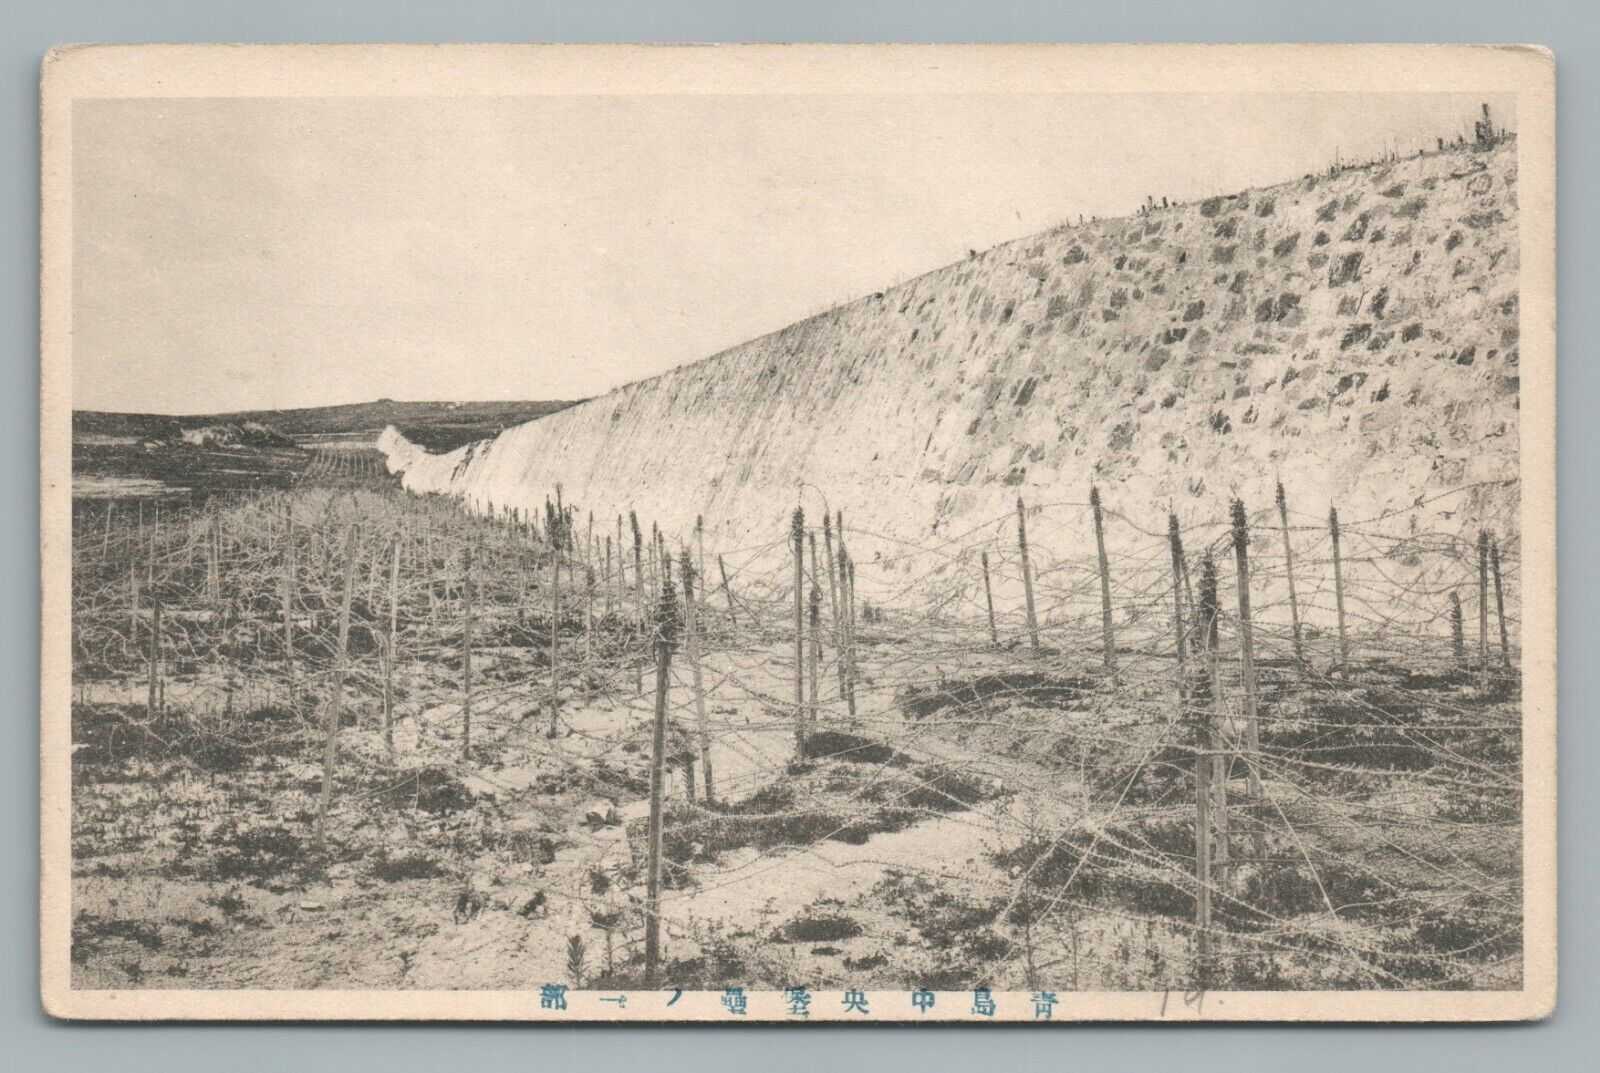 “Barbed Wire Entanglement” Chinese—Korean Border? Antique War Postcard~1920s